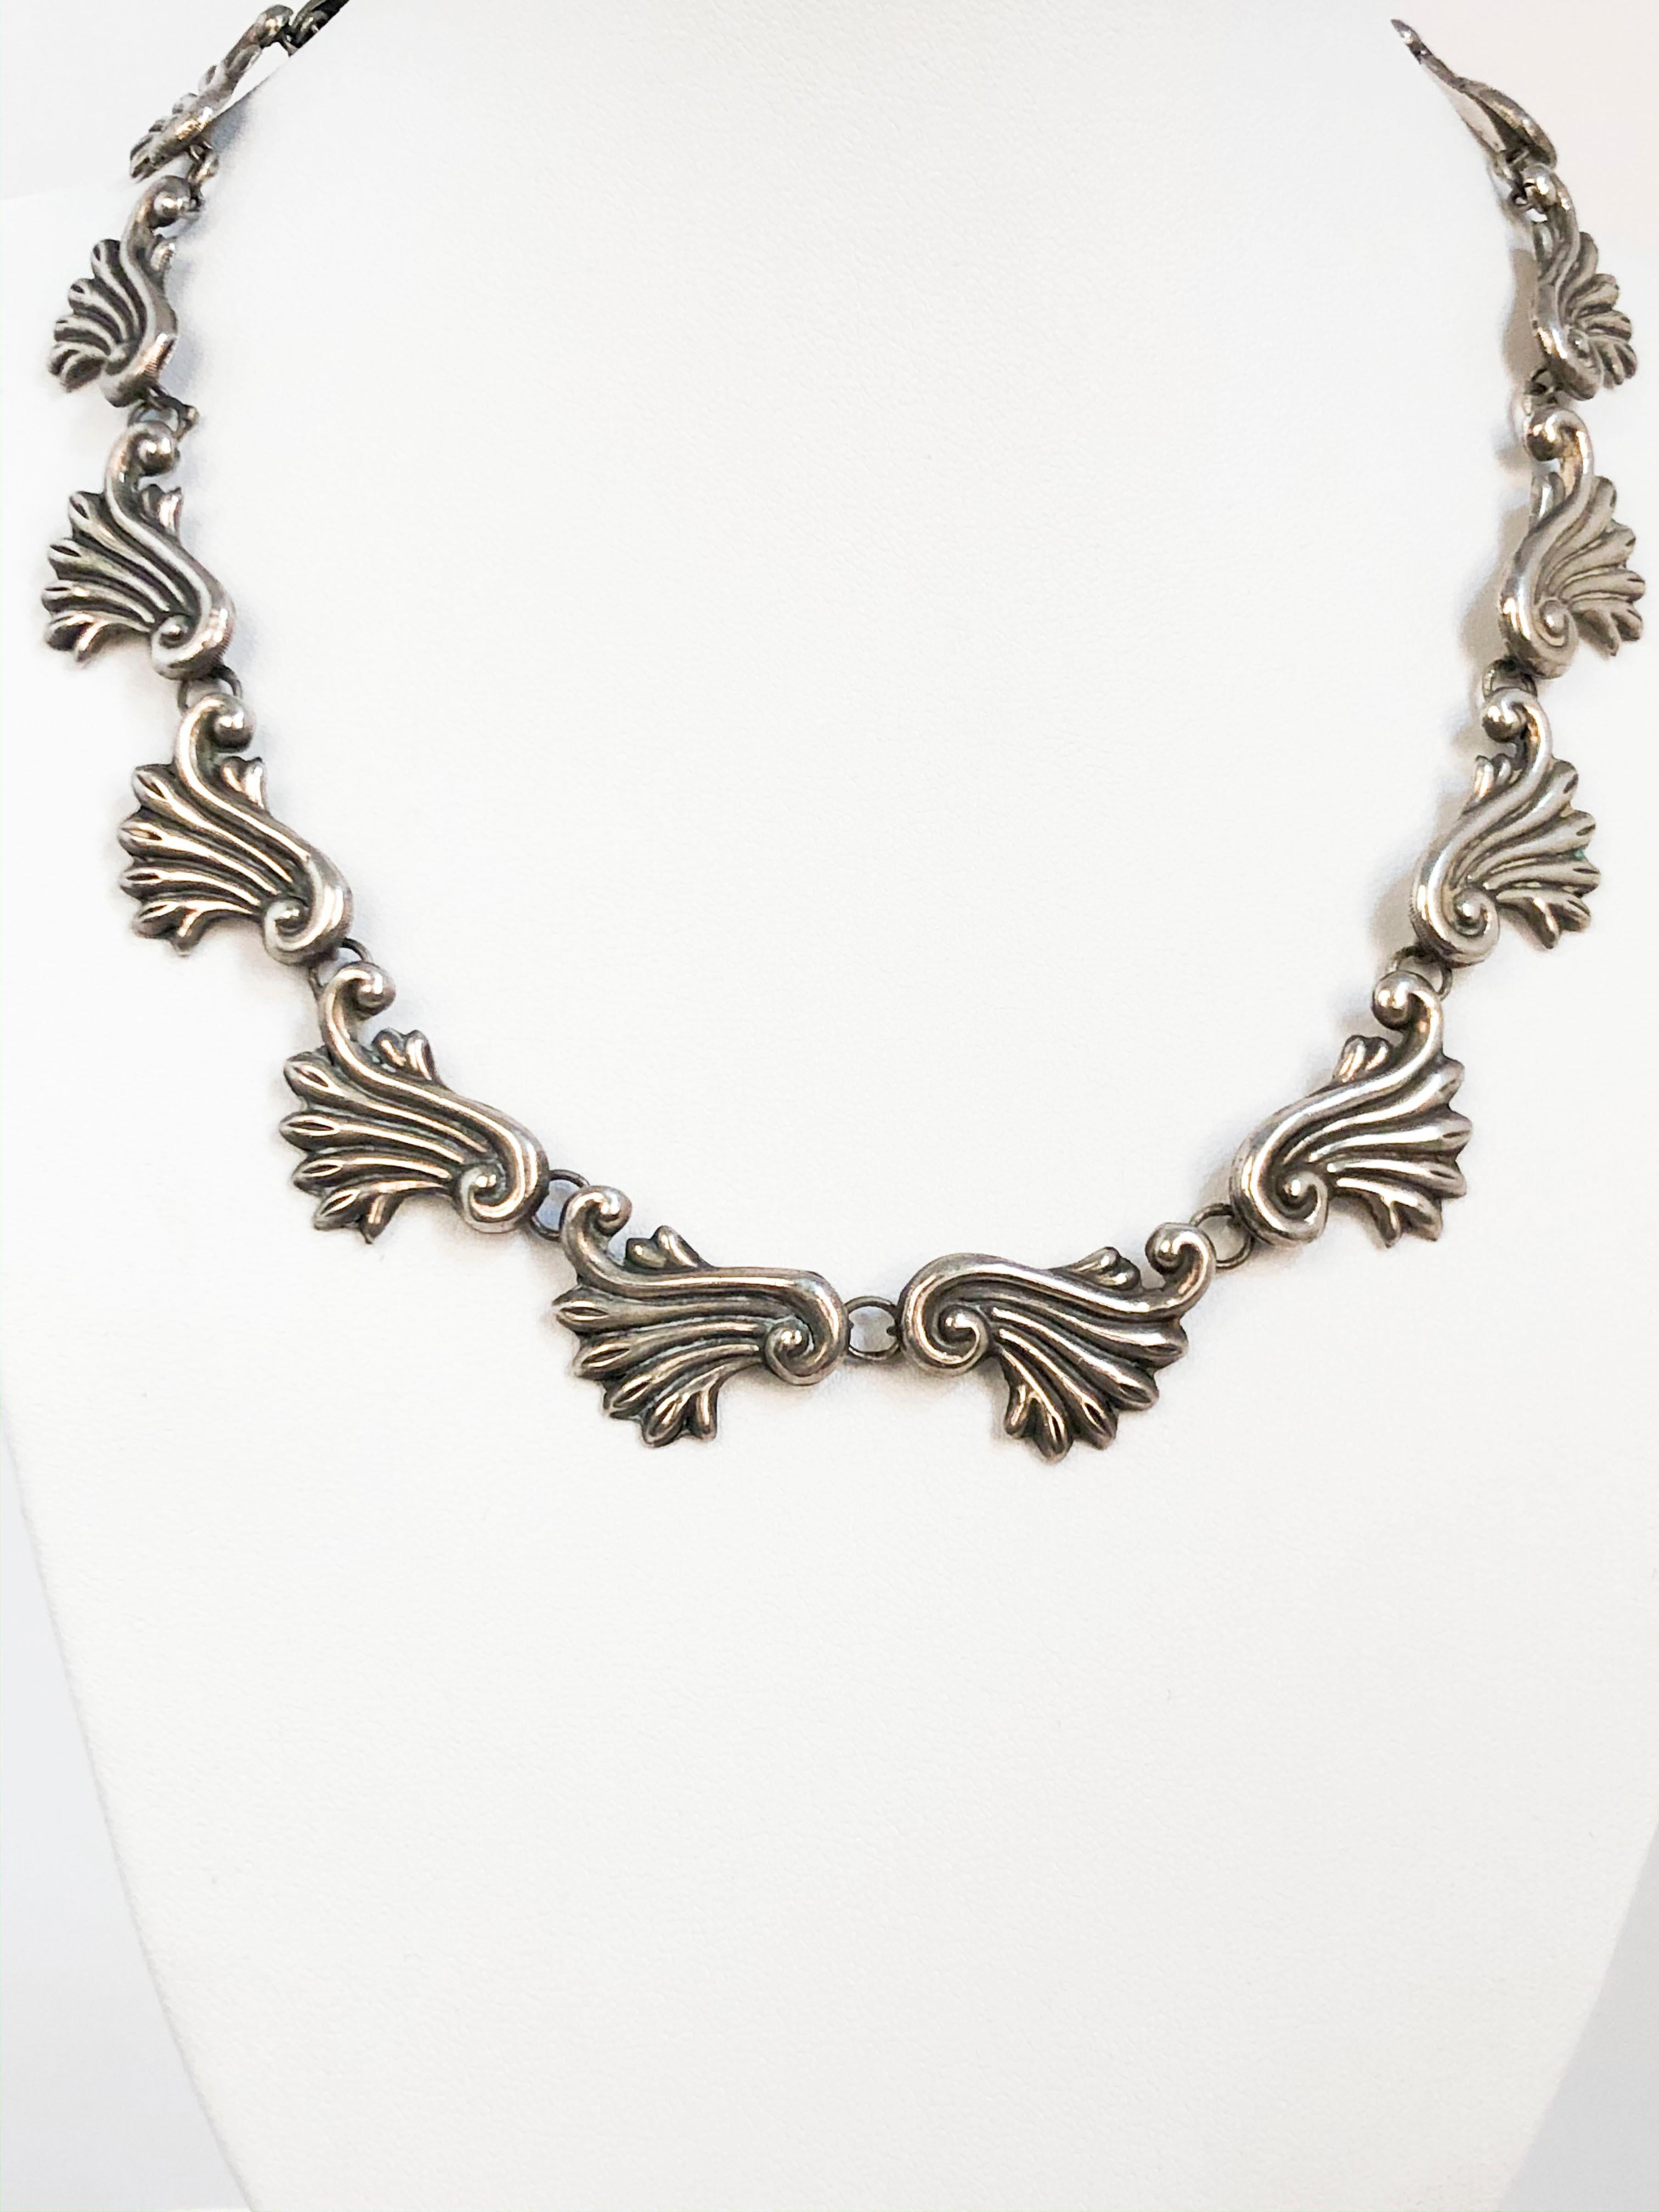 1940s Taxco silver necklace featuring ornate links that are orientated in a symmetrical order. 